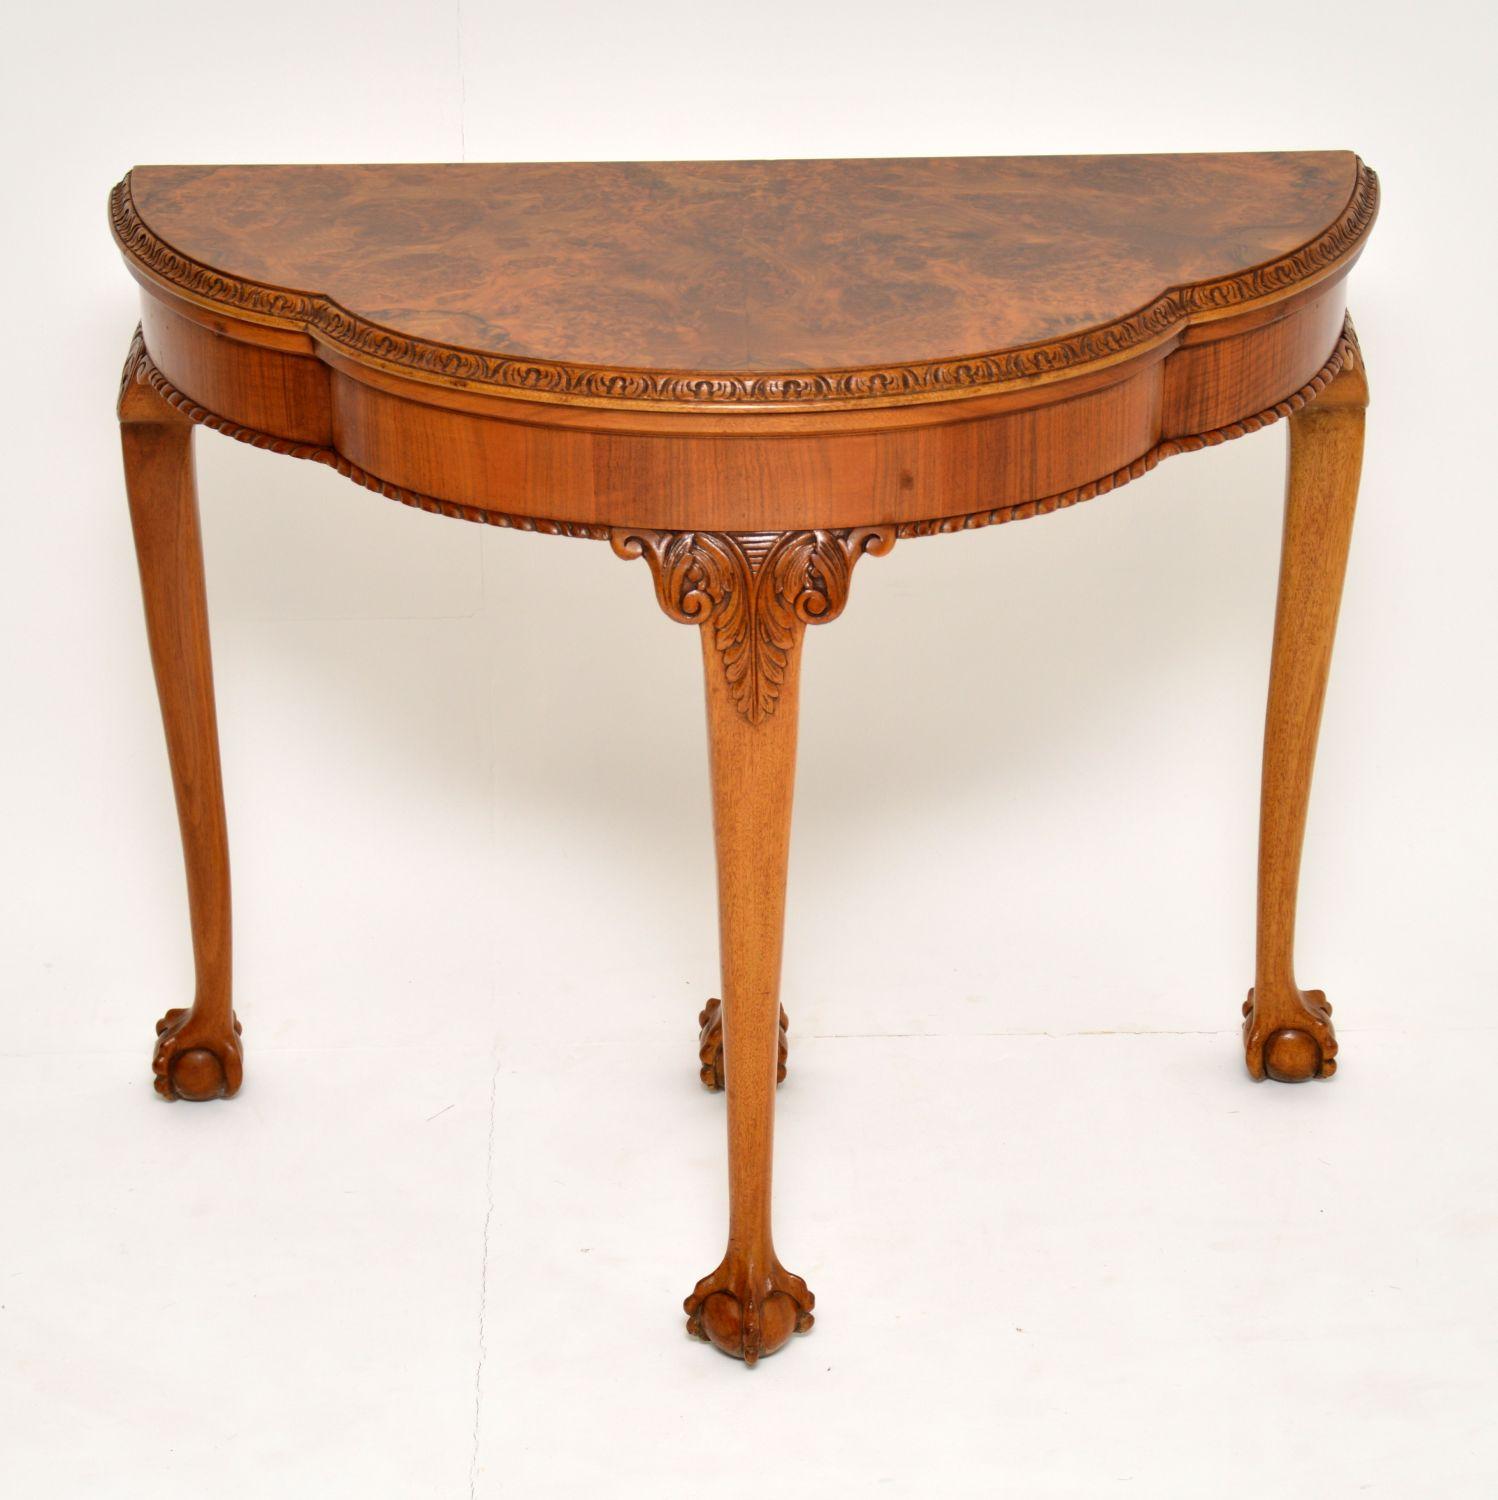 Antique Queen Anne style walnut card table dating from the 1920s period & in excellent condition. It’s just been French polished & re-baized. It has a serpentine shaped burr walnut top, with fine carving around the top & bottom edges. The back is